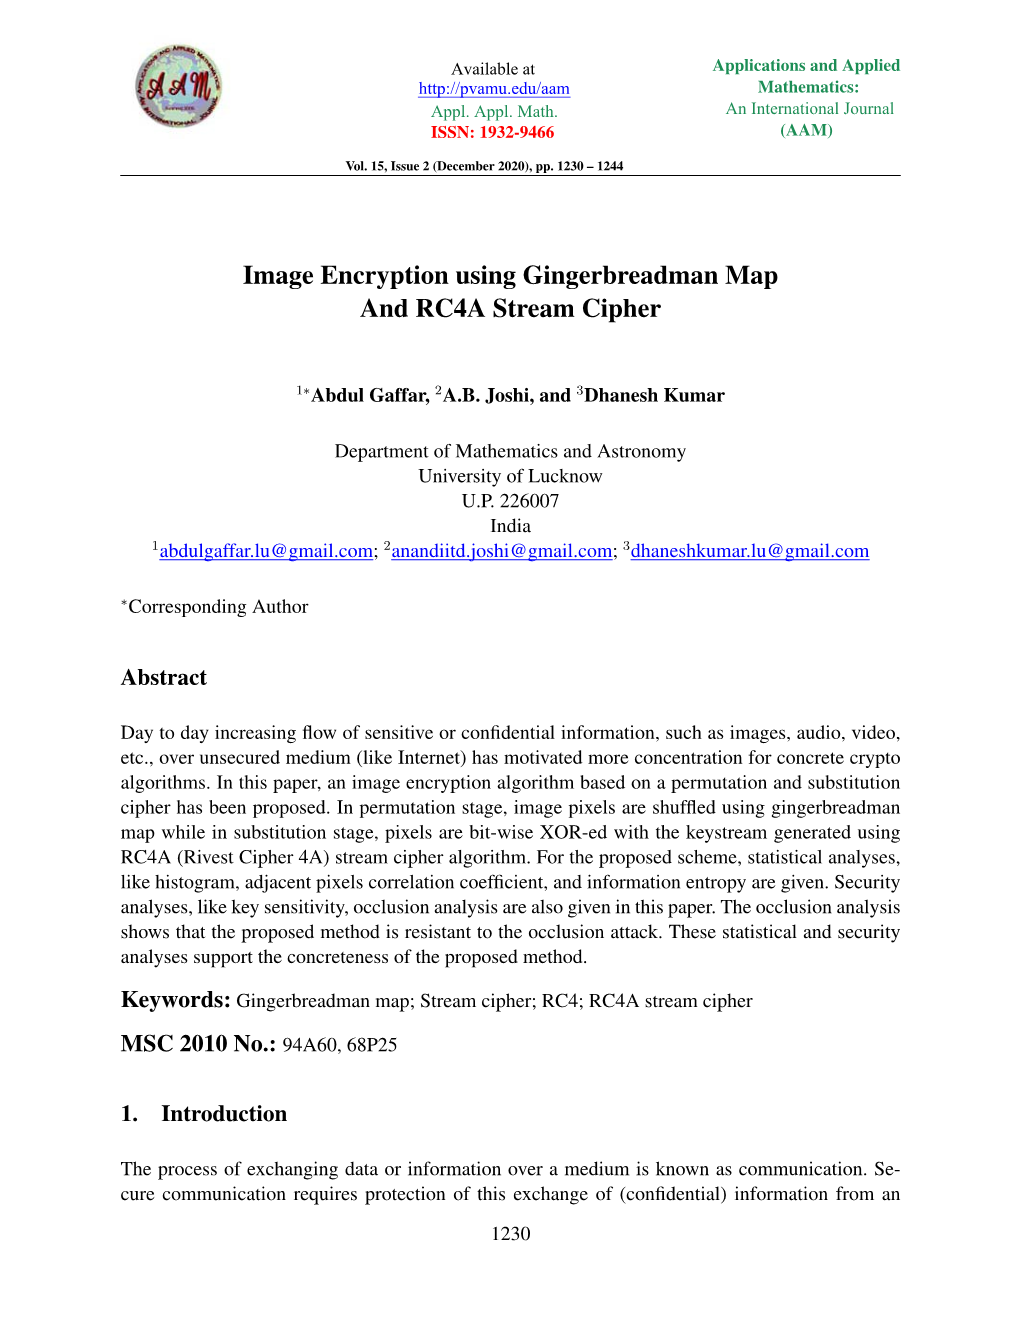 Image Encryption Using Gingerbreadman Map and RC4A Stream Cipher